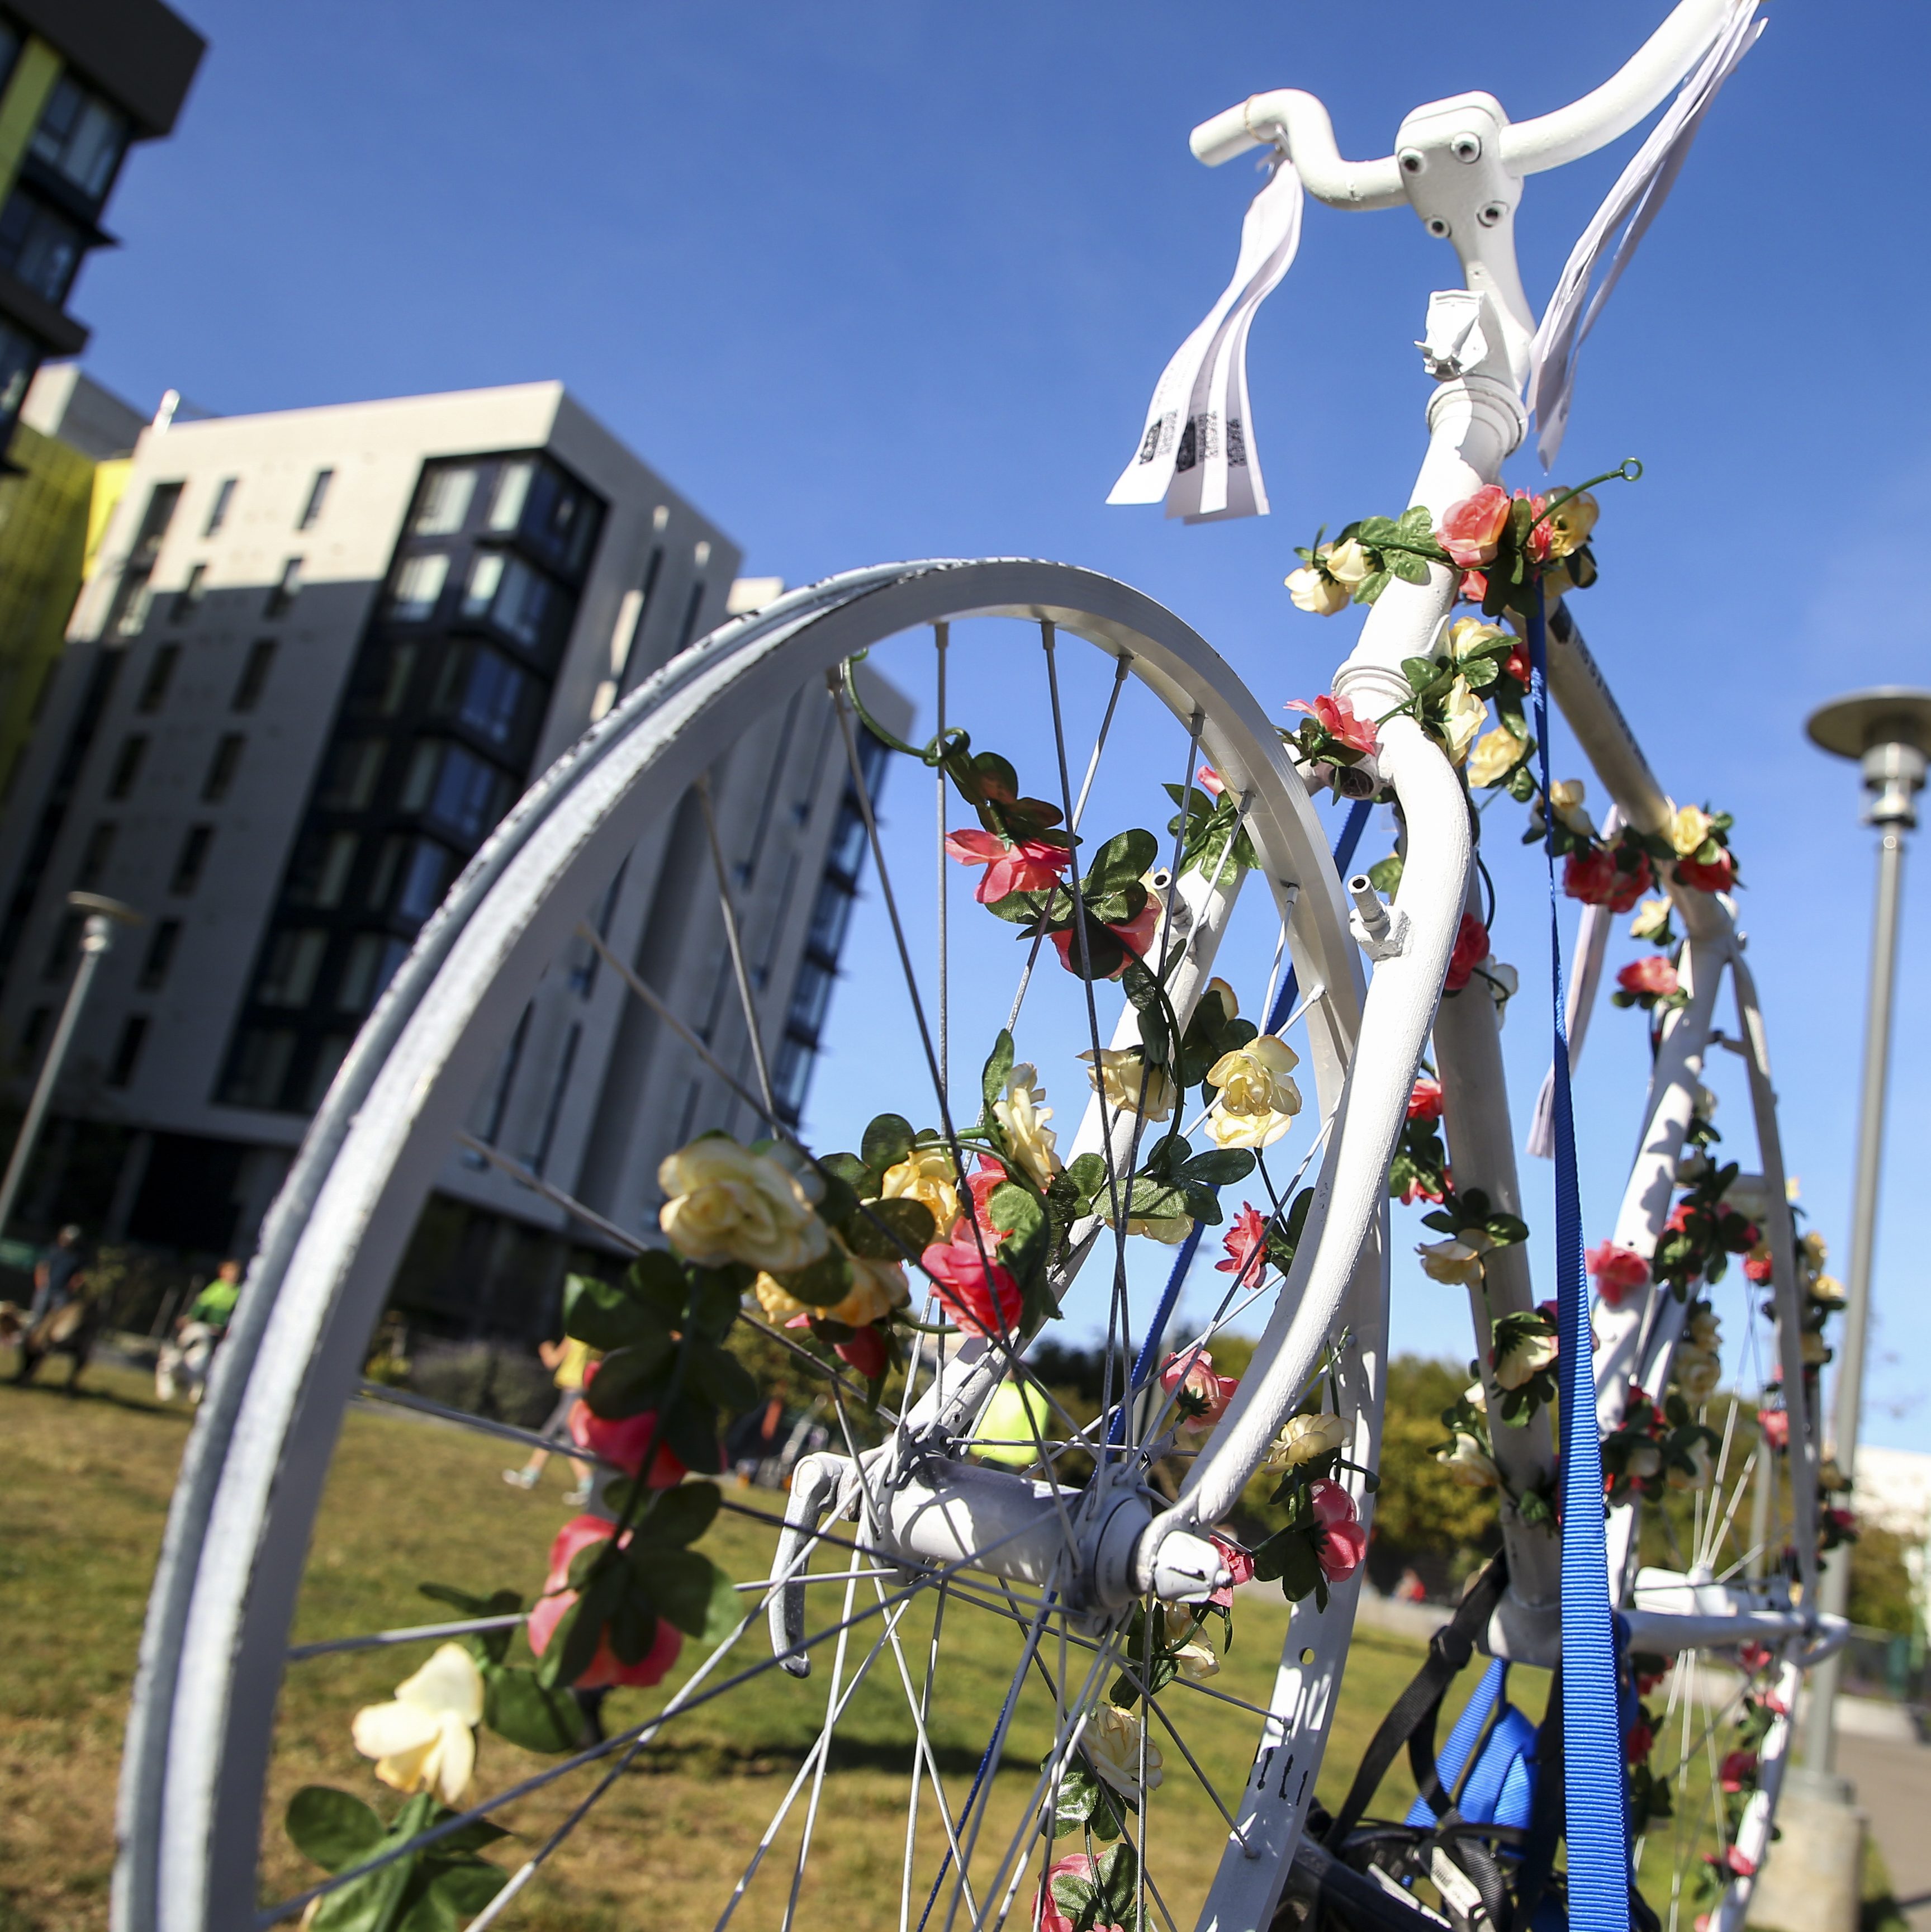 A white bicycle adorned with colorful flowers is parked in front of several modern buildings, set against a clear blue sky. A grassy area and a lamp post are also visible.